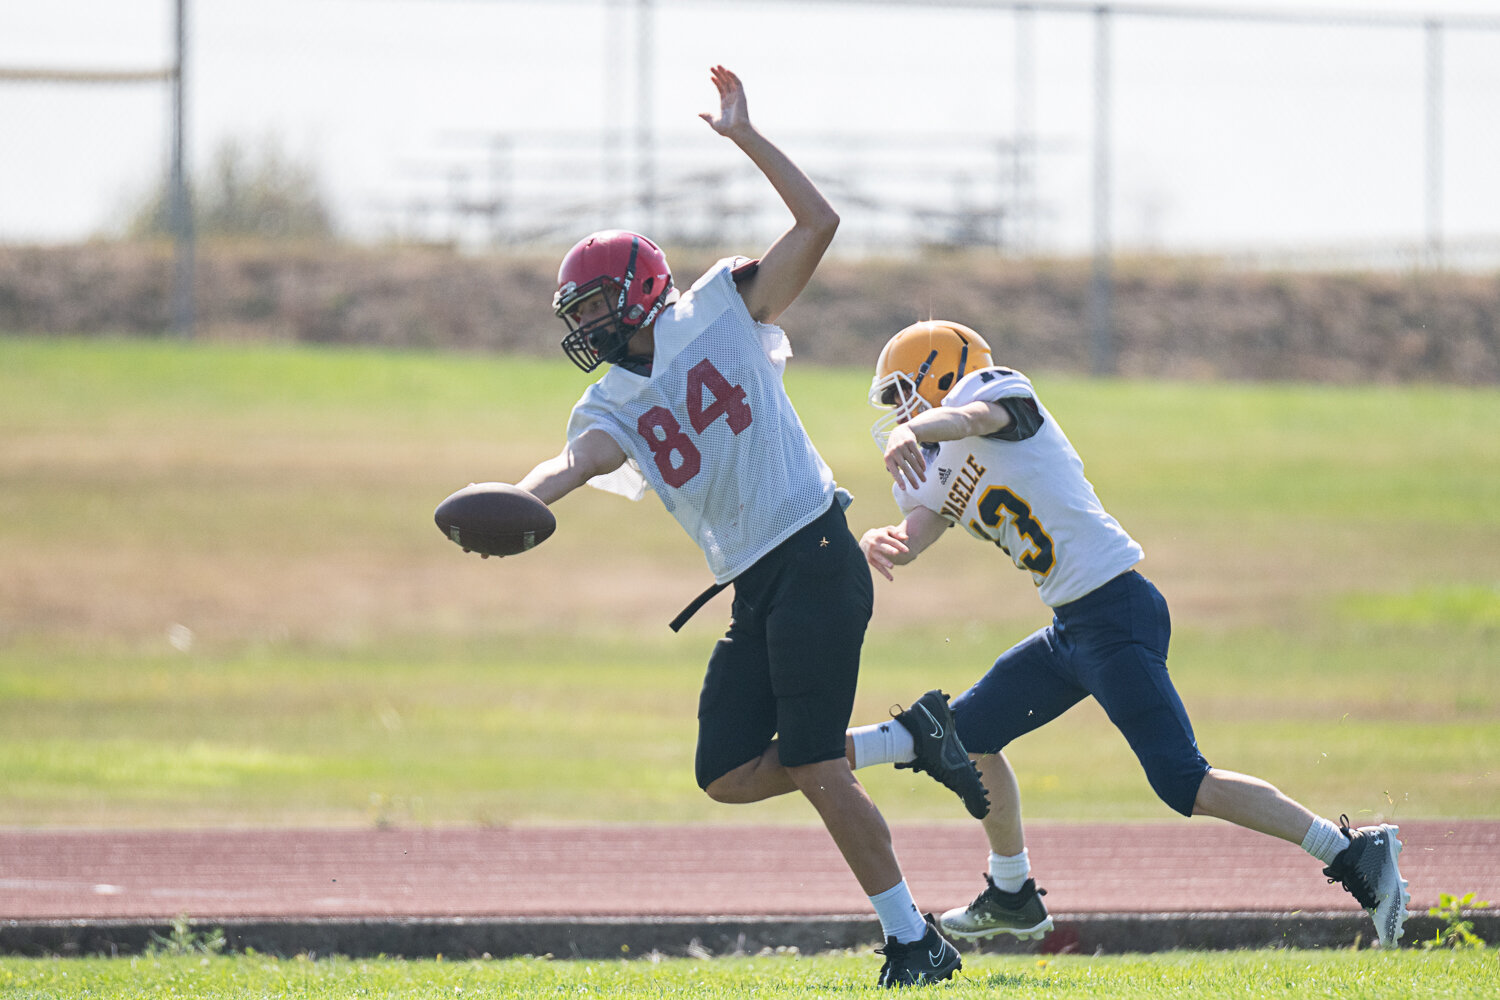 Mossyrock's Hunter Isom tiptoes along the sideline after making a catch at Winlock's jamboree on Saturday, Aug. 26.